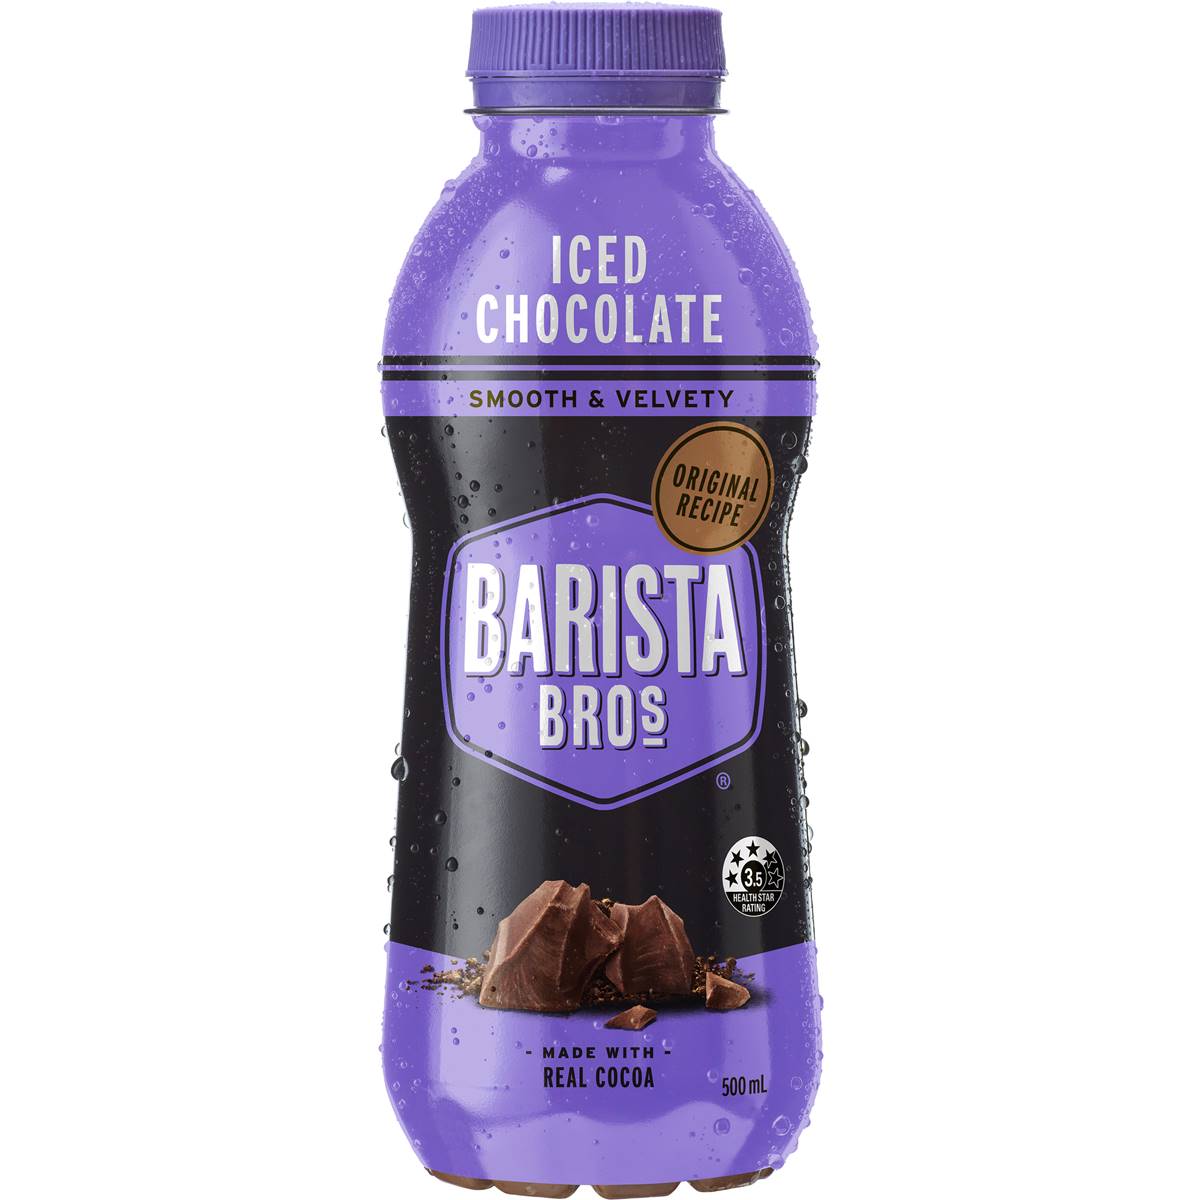 Calories in Barista Bros Iced Chocolate